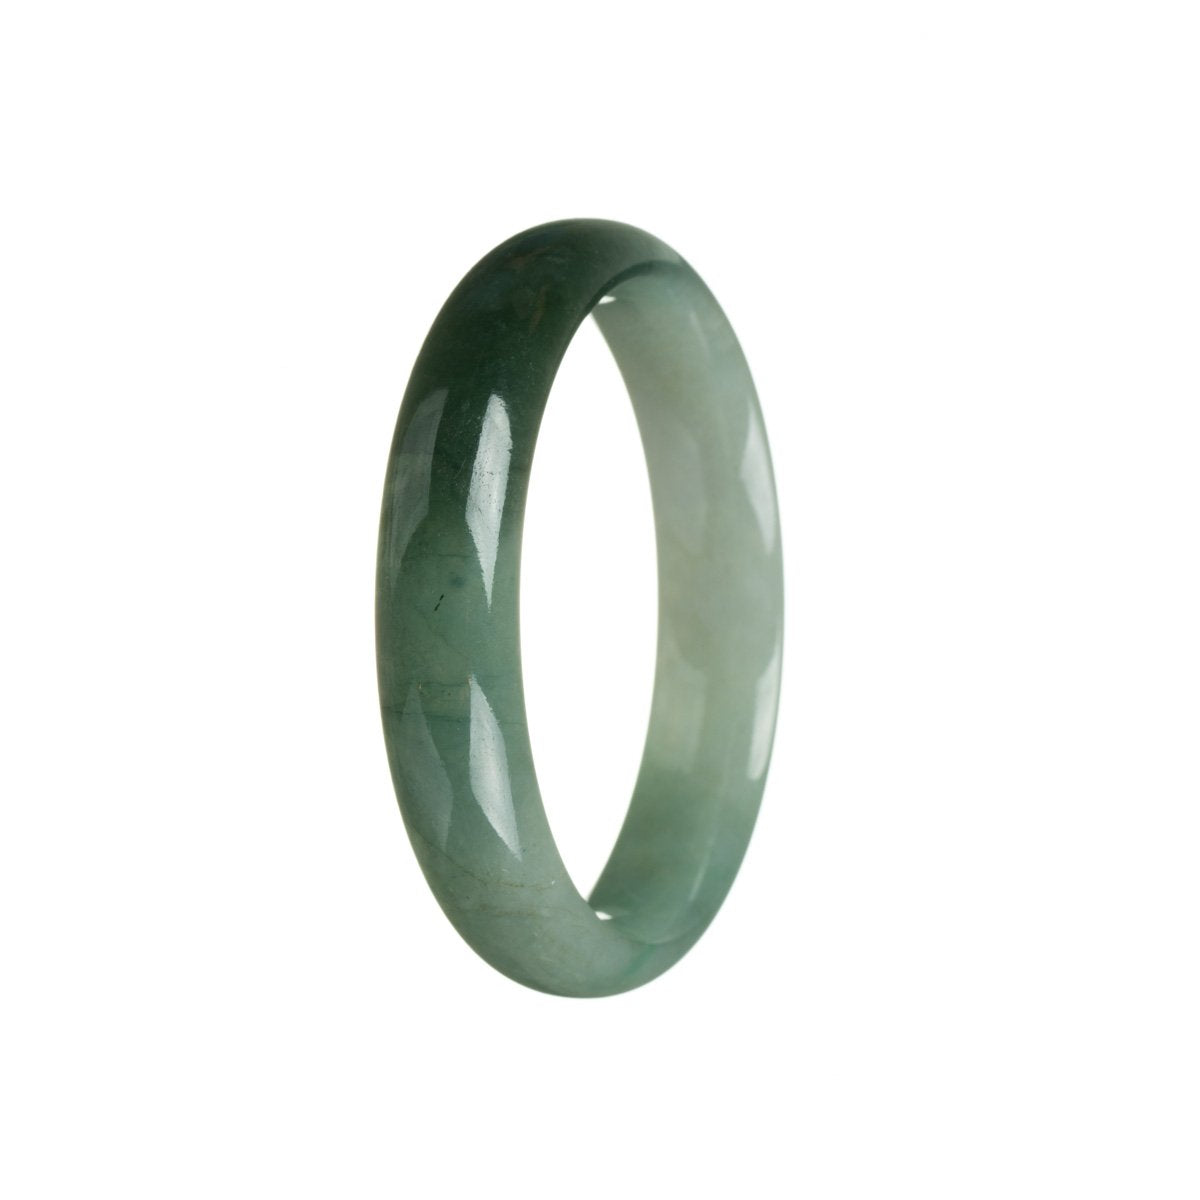 A close-up image of a half-moon shaped jade bangle bracelet with a genuine Grade A green color. The bracelet is made of dark green jade and has a 56mm diameter. It is a beautiful piece of jewelry from MAYS GEMS.